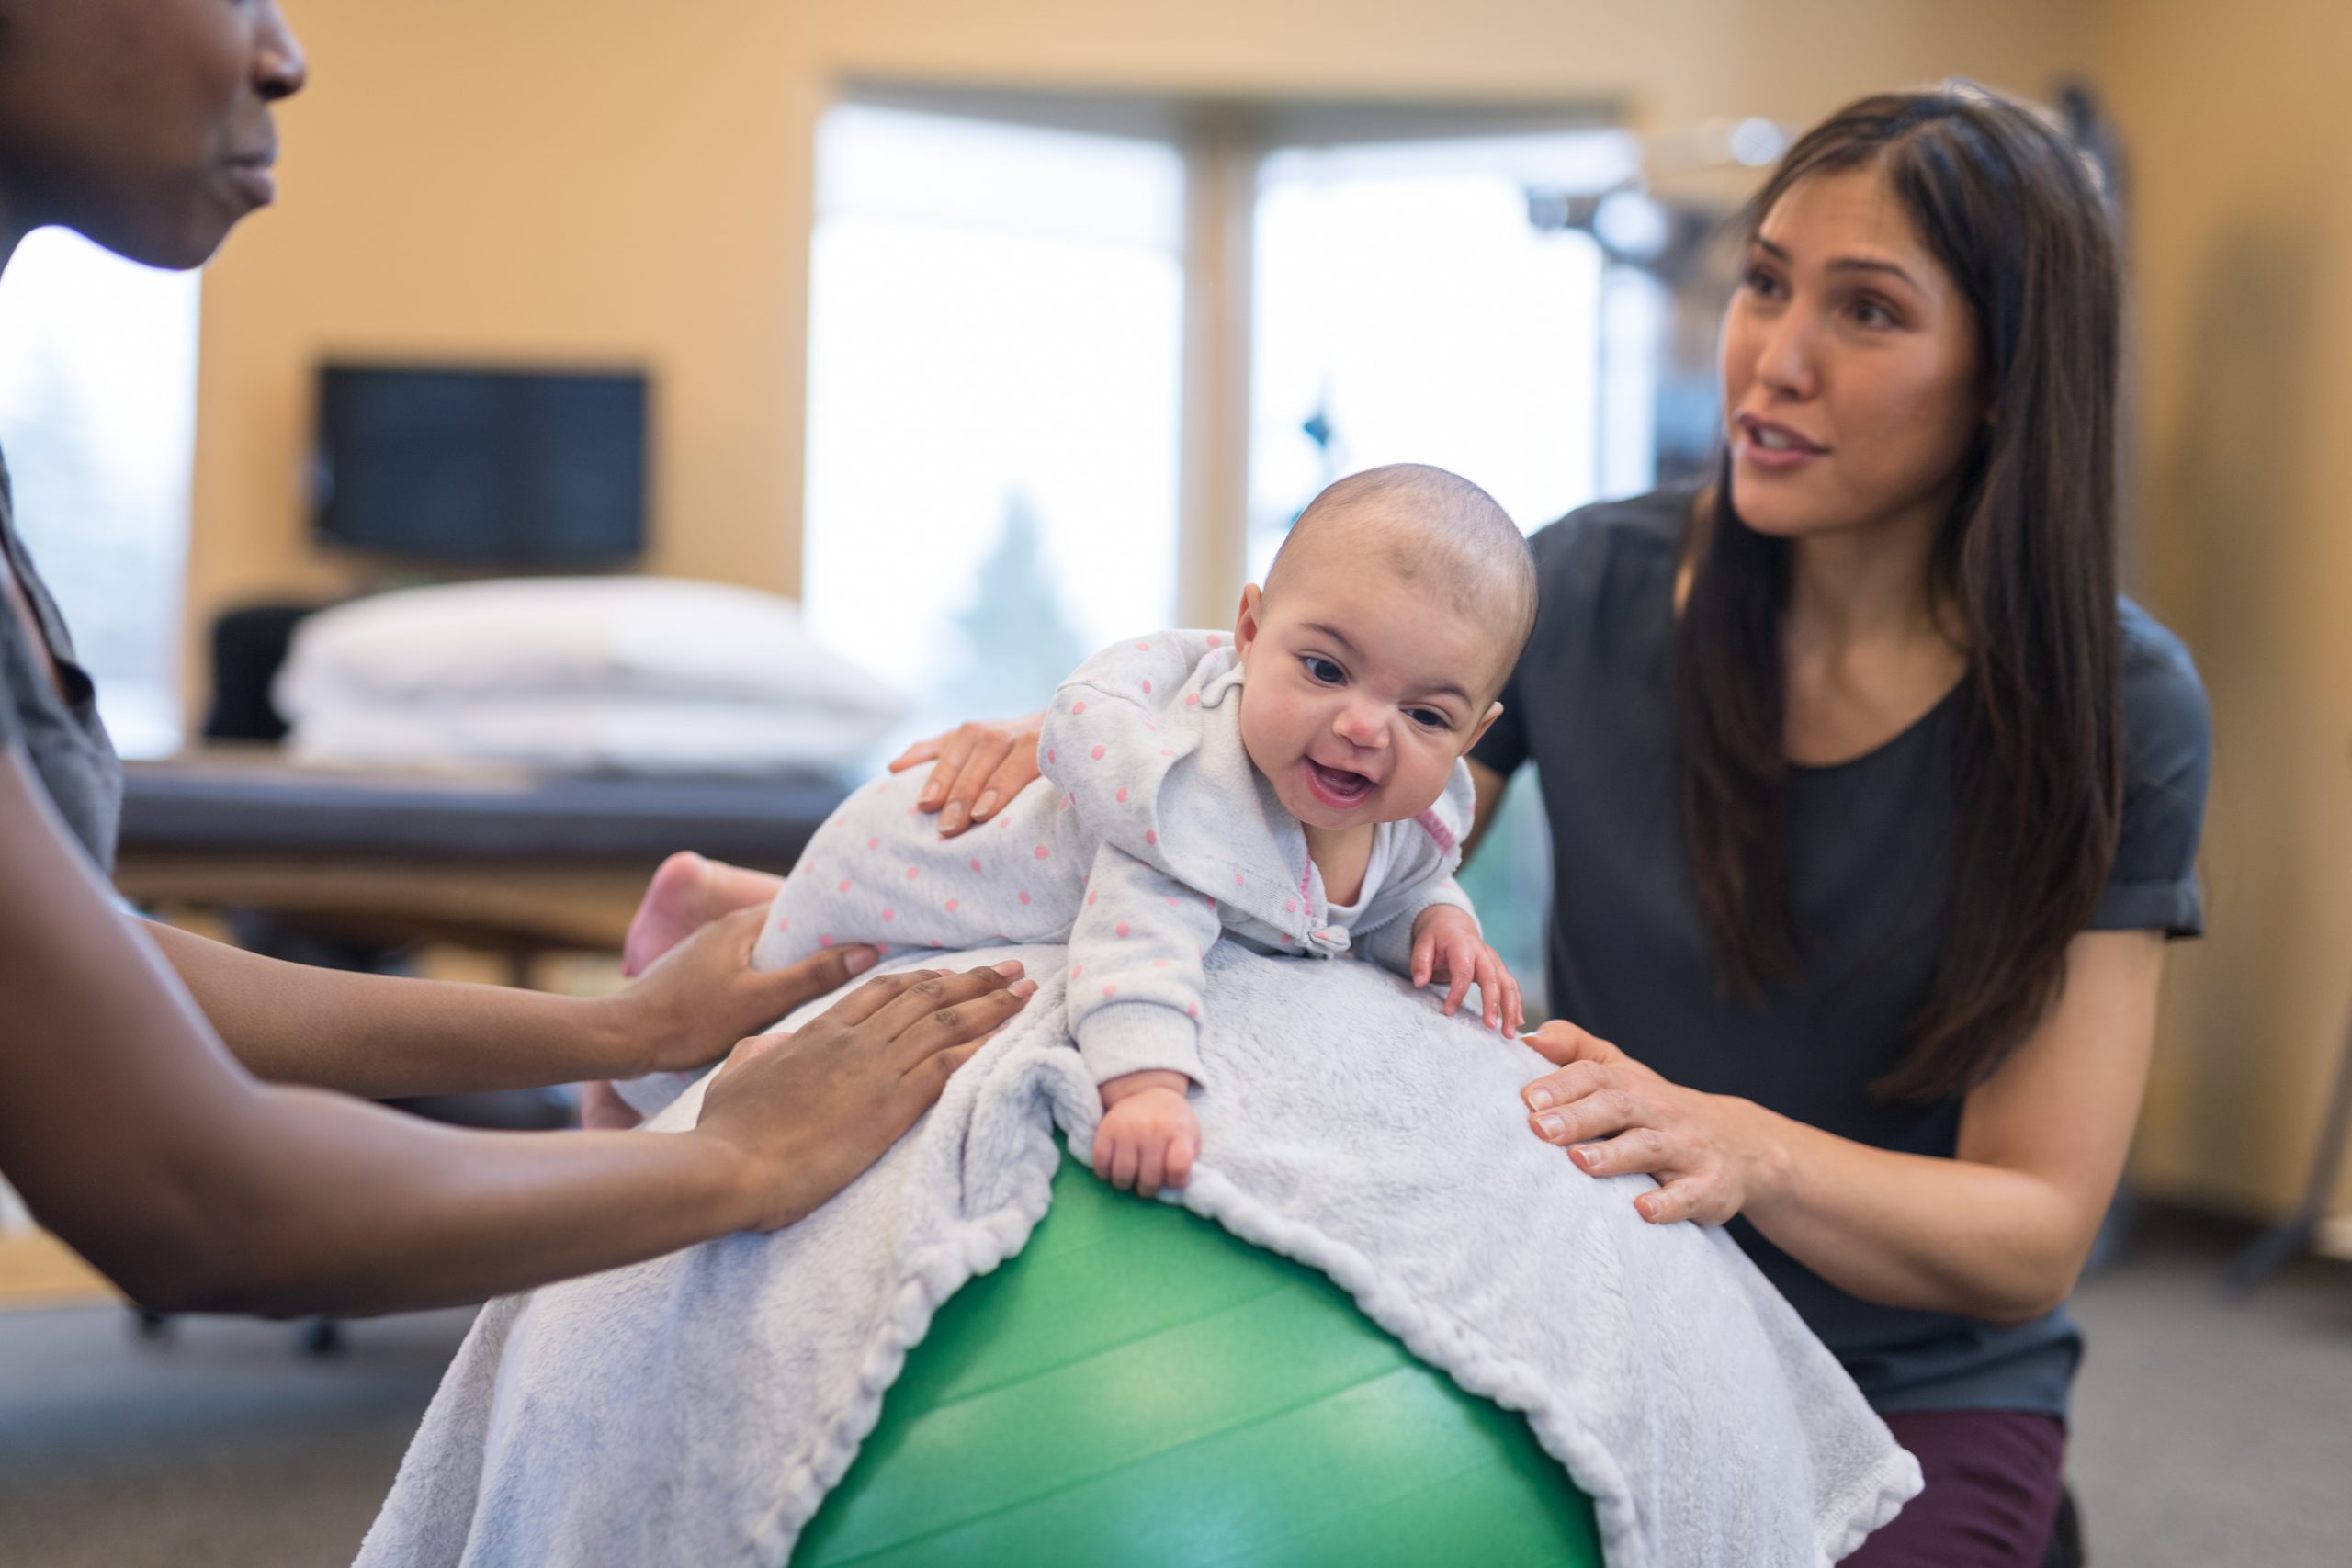 A physical therapist of Asian descent works with an infant. She and baby's mom are helping her lie face down on an exercise ball while she practices balancing.